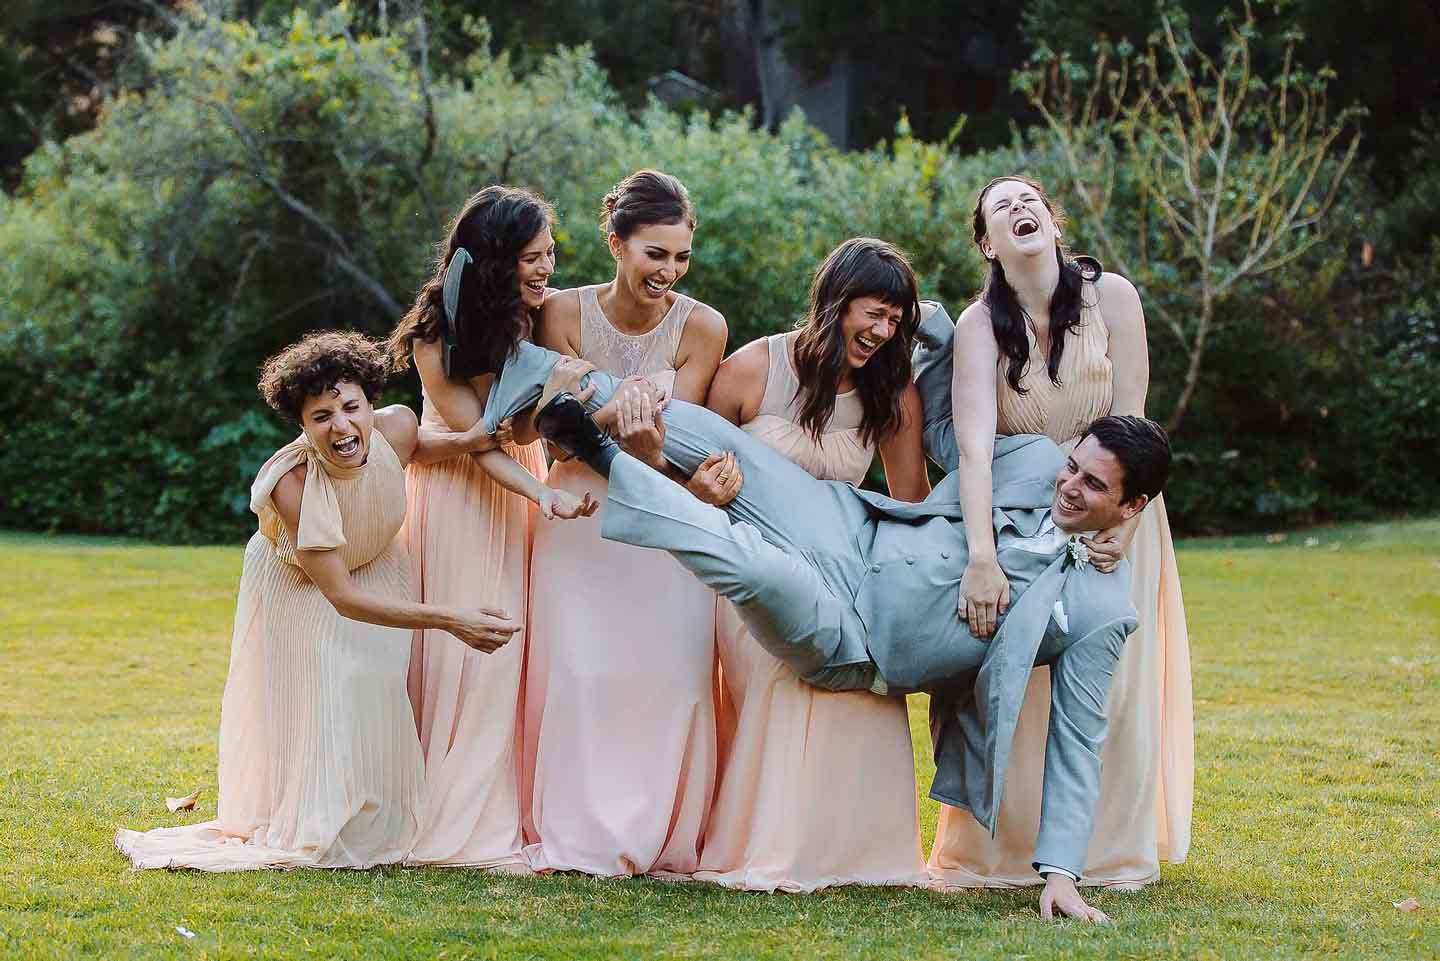 https://symboll.com/wp-content/uploads/2021/09/28-Bridal-Party-Poses2.jpg